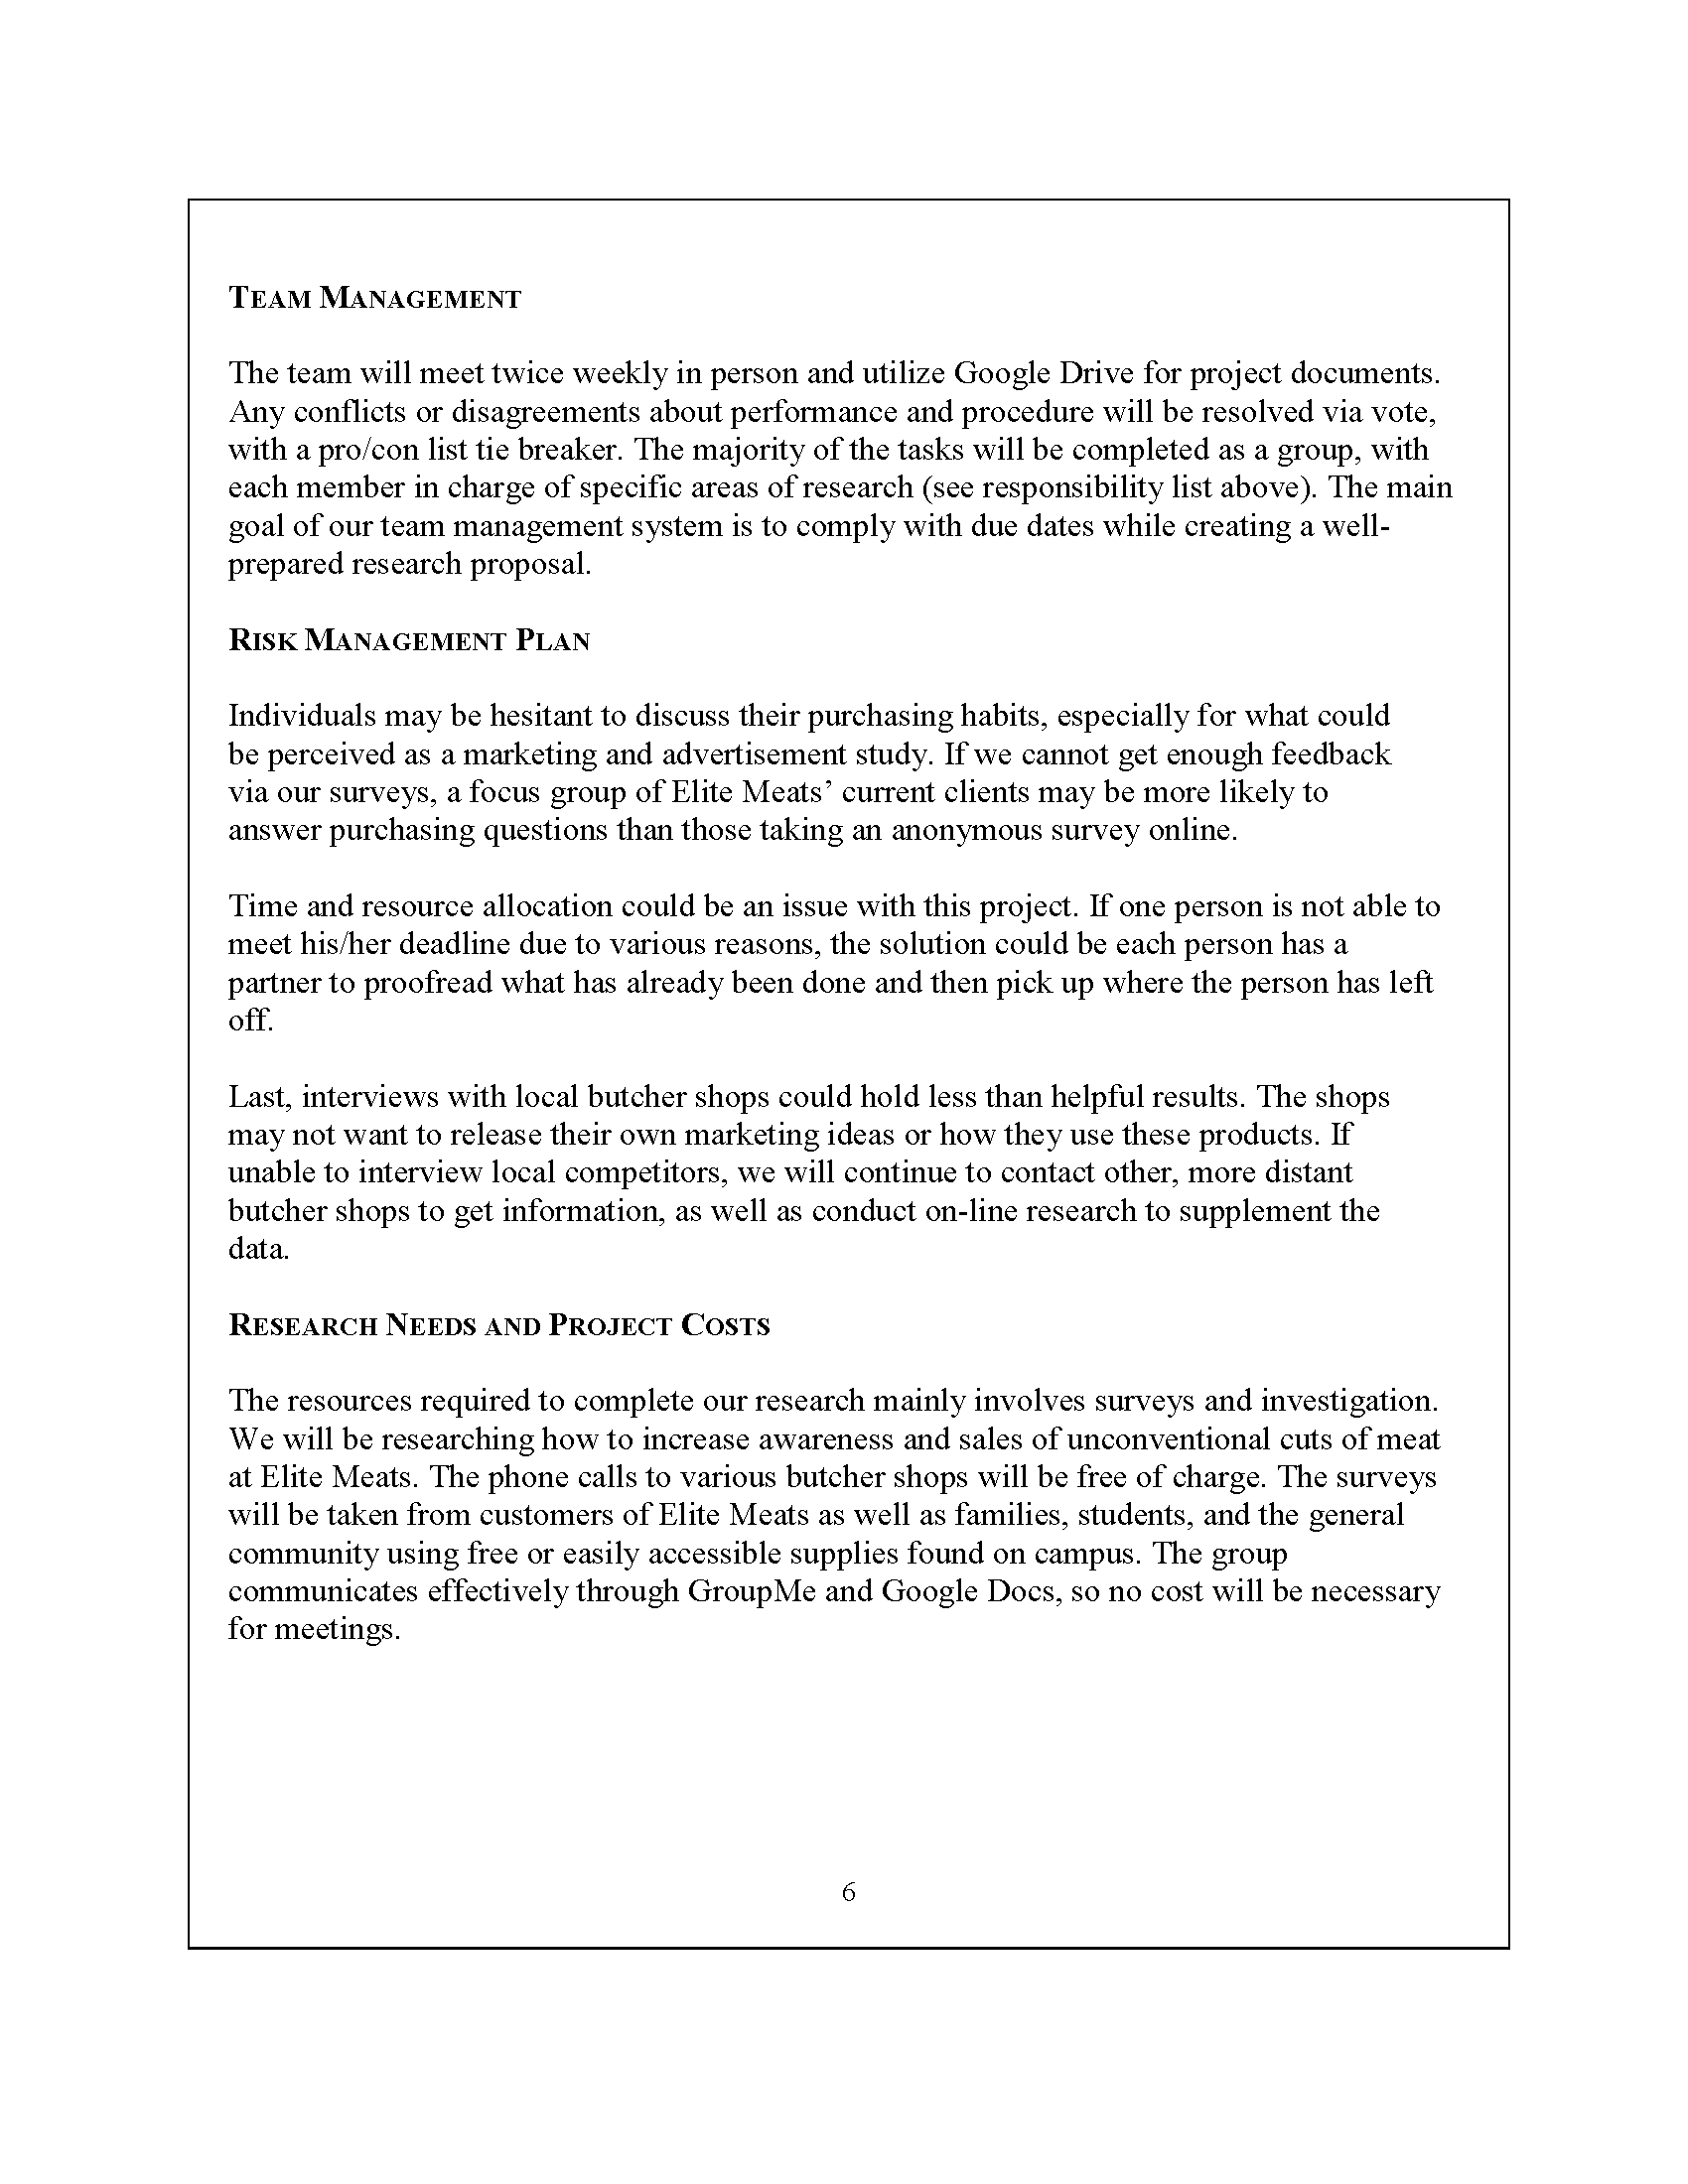 Page 6 of Proposal example